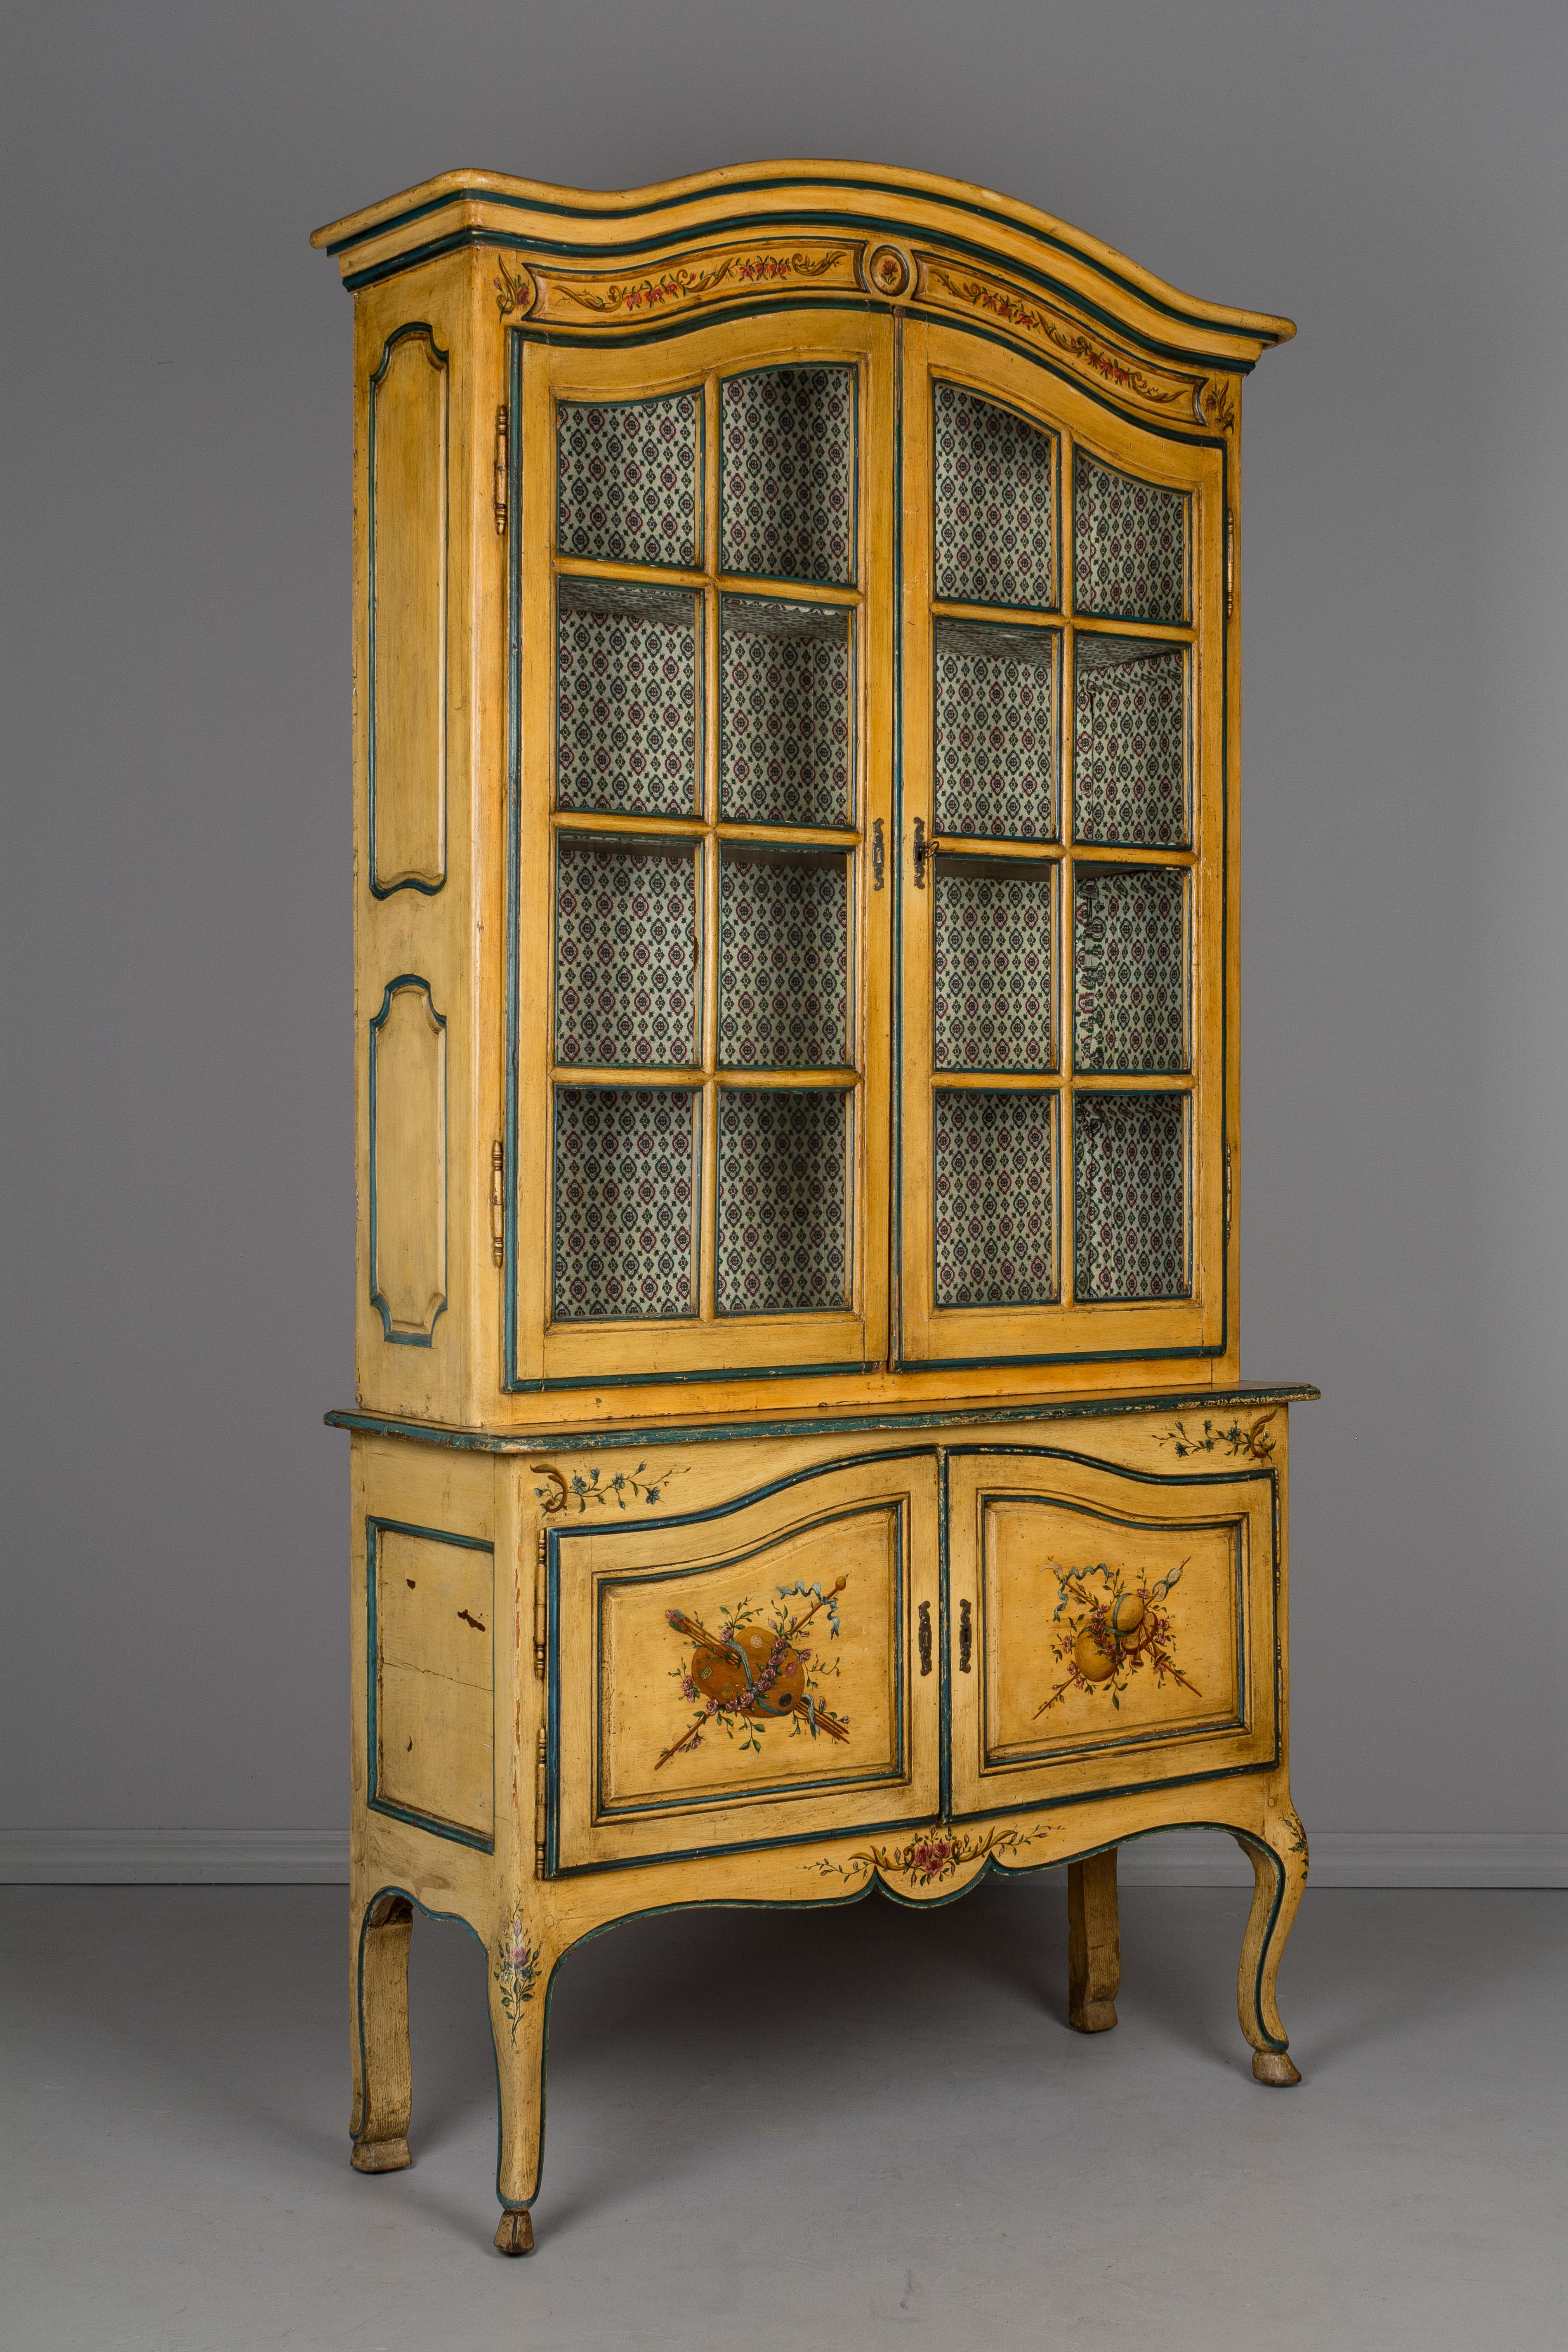 An early 19th century French Louis XV style vitrine, or china cabinet made of pine and oak with pegged construction and painted in the Provençal manner. In two parts, the bottom buffet on curved legs and having two doors with a working lock. The